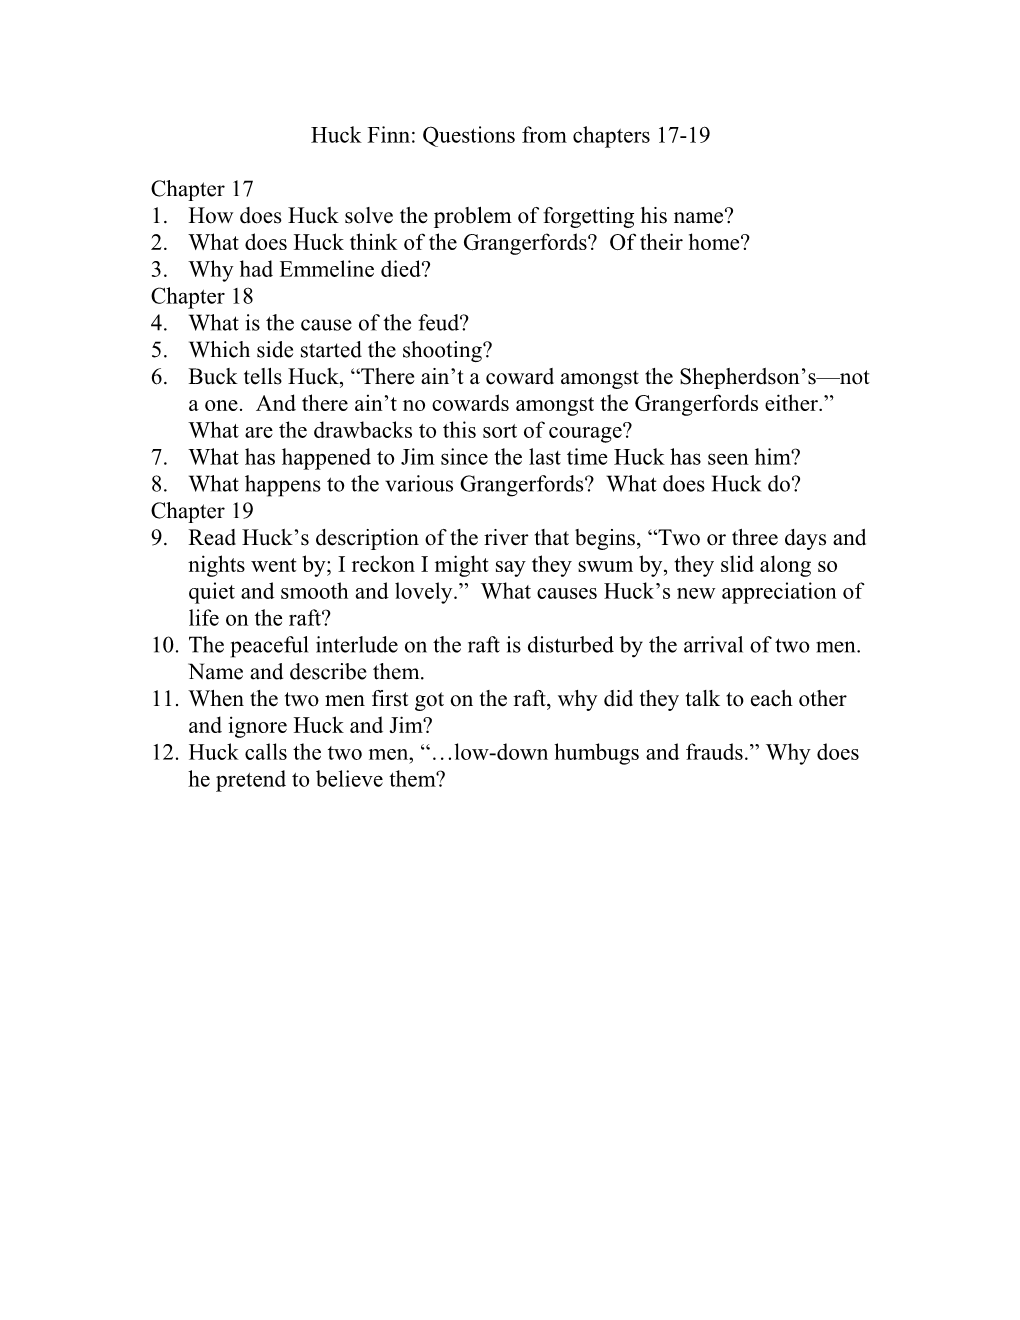 Huck Finn: Questions from Chapters Ten and Eleven